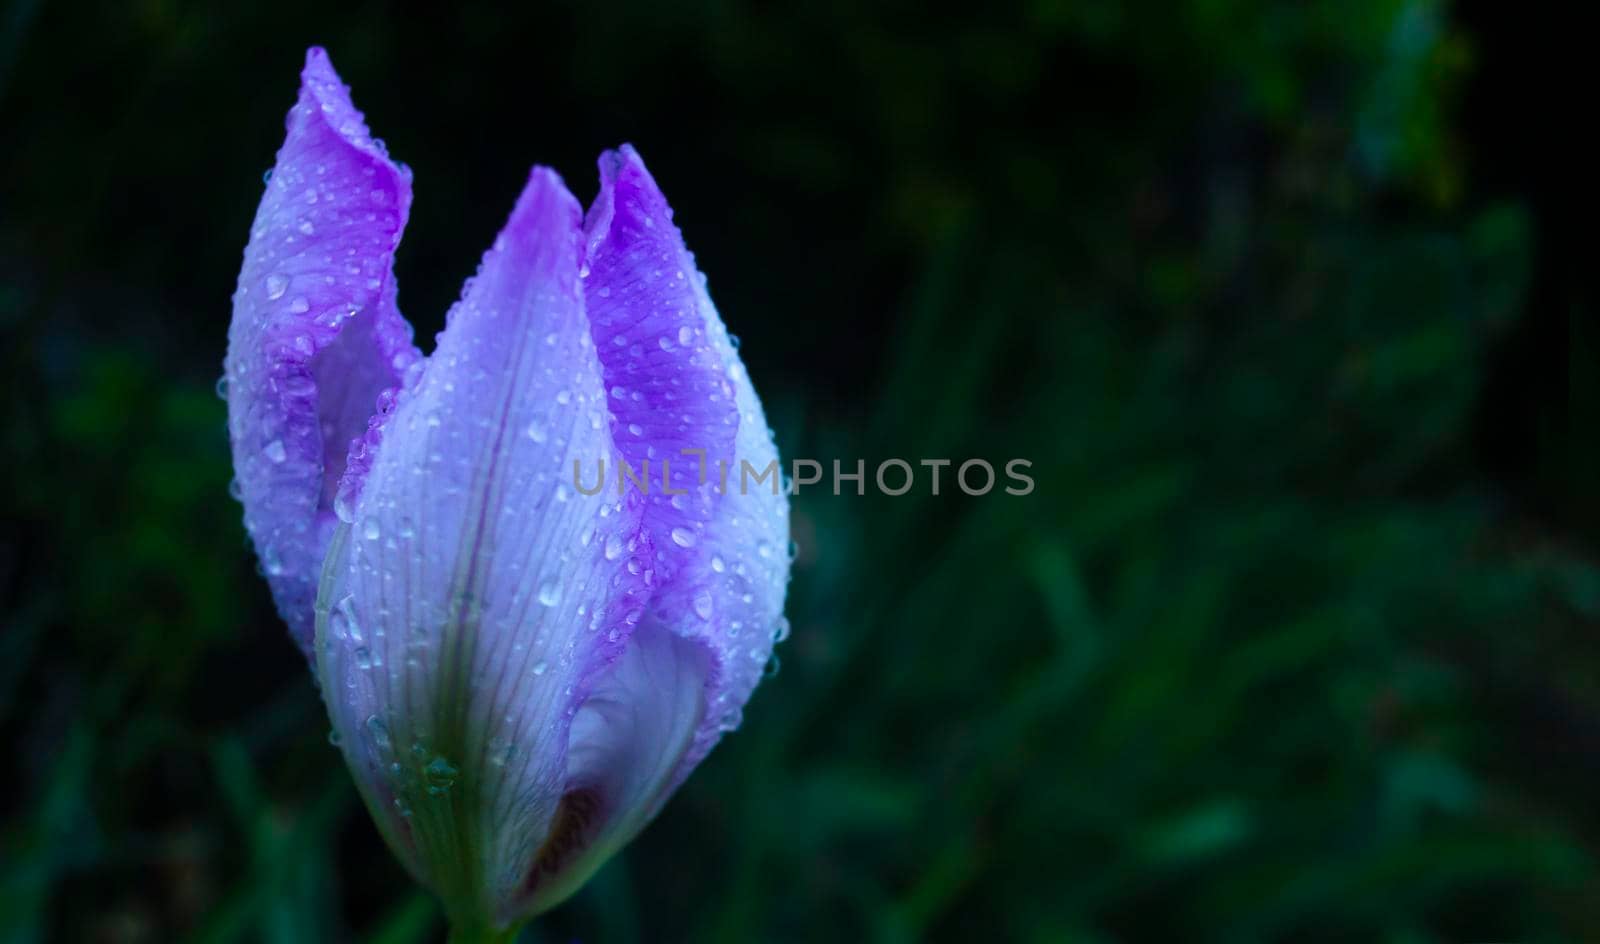 macro shot of a flower iris with water drops, Flowering irises with drops of water after rain, background, blue, nature, garden, green, plant, bloom, spring, white, purple, blooming, summer, flora, japanese, blossom, flowers, violet, color, beautiful, floral, petal botany beauty macro natural day colorful field fresh bright